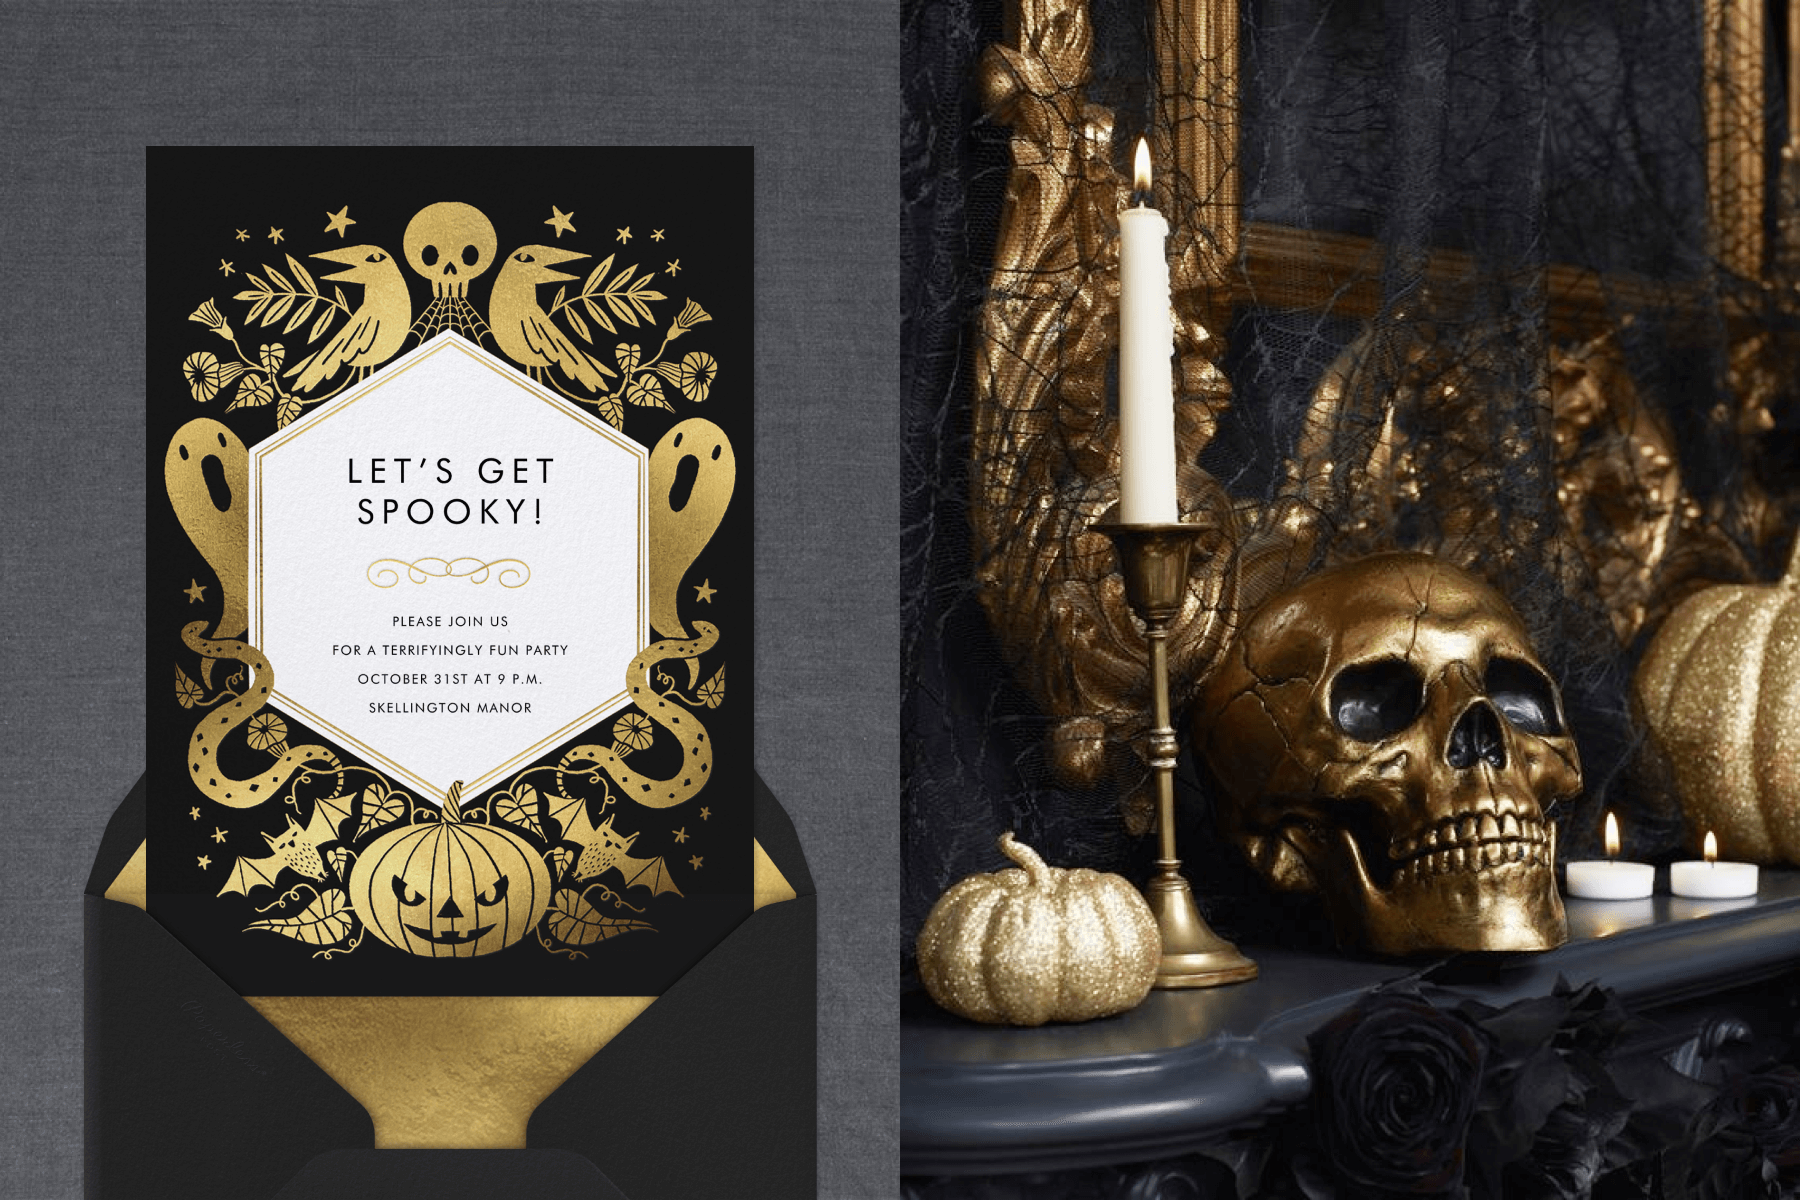 Left: A black Halloween party invitation with gold mirrored illustrations of simplified ghosts, skulls, ravens, and a pumpkin with a white hexagon in the middle reads “let’s get spooky!.” Right: On a black mantel sit Halloween objects in gold—a gourd, a candle stick and taper candle, and a skull in front of an ornate wall mirror.